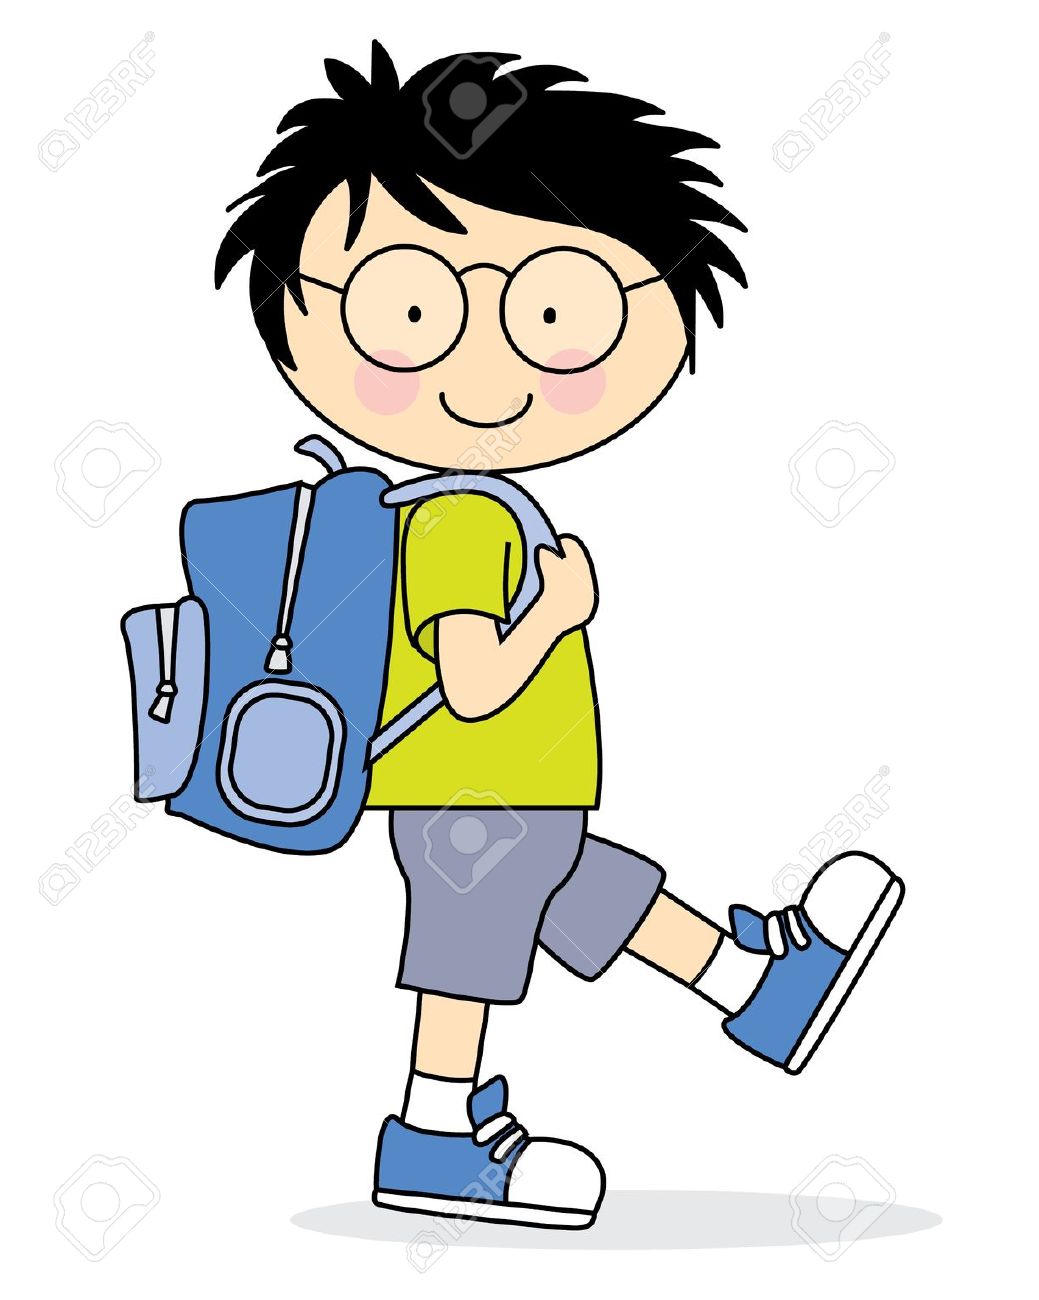 16,471 School Bag Stock Vector Illustration And Royalty Free.